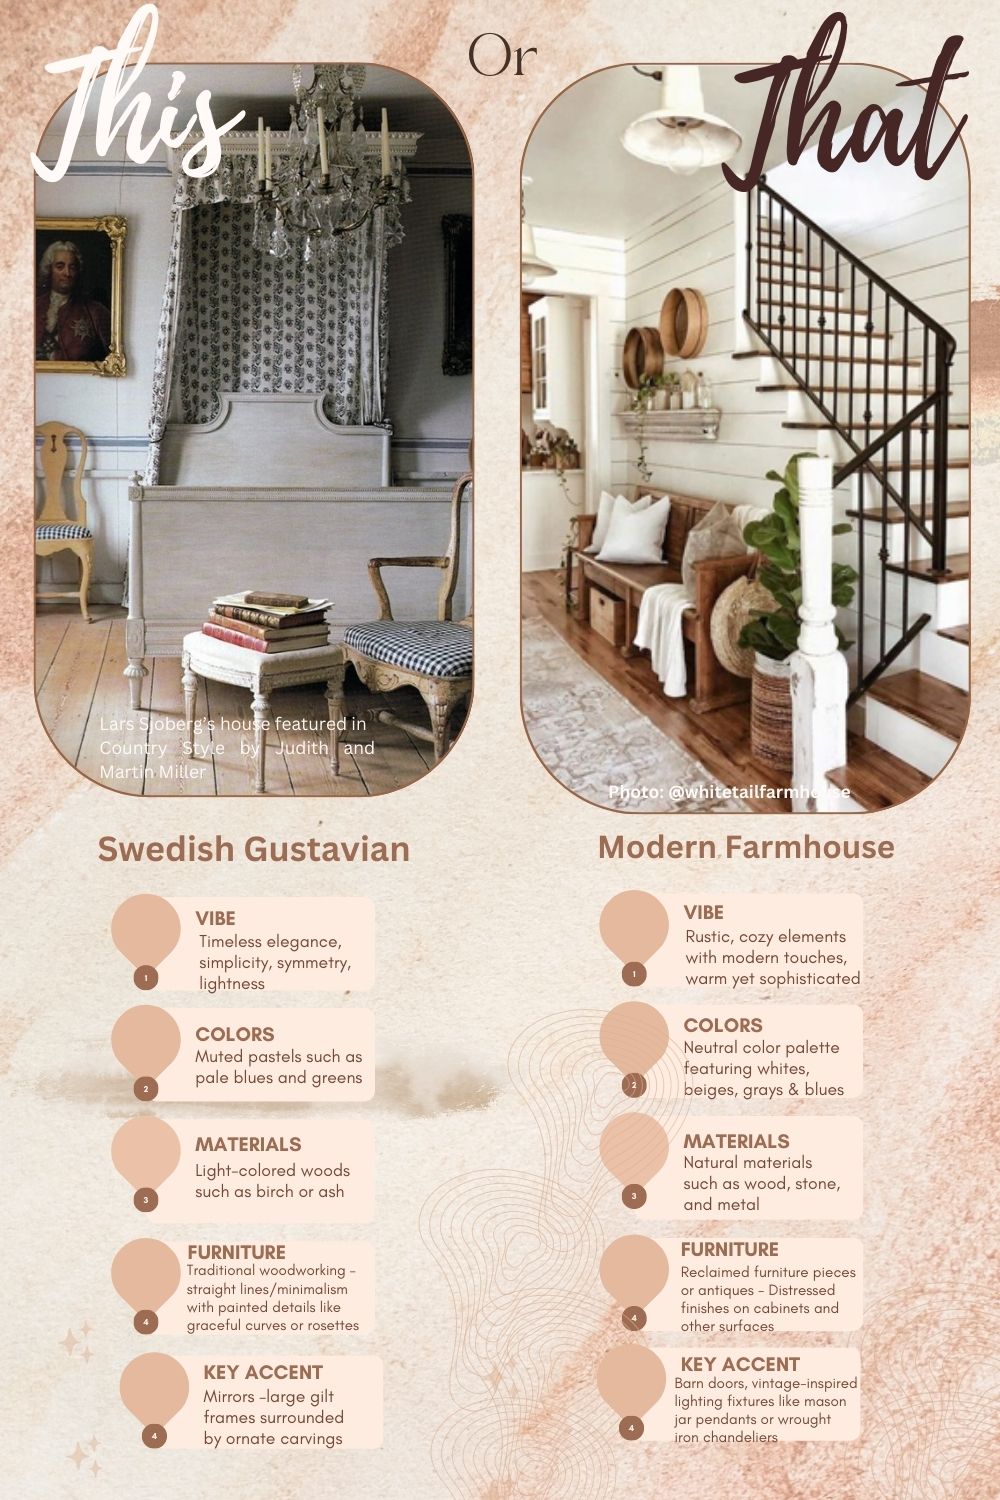 Modern Farmhouse Vs. Swedish Gustavian Style; Which Is You Style?